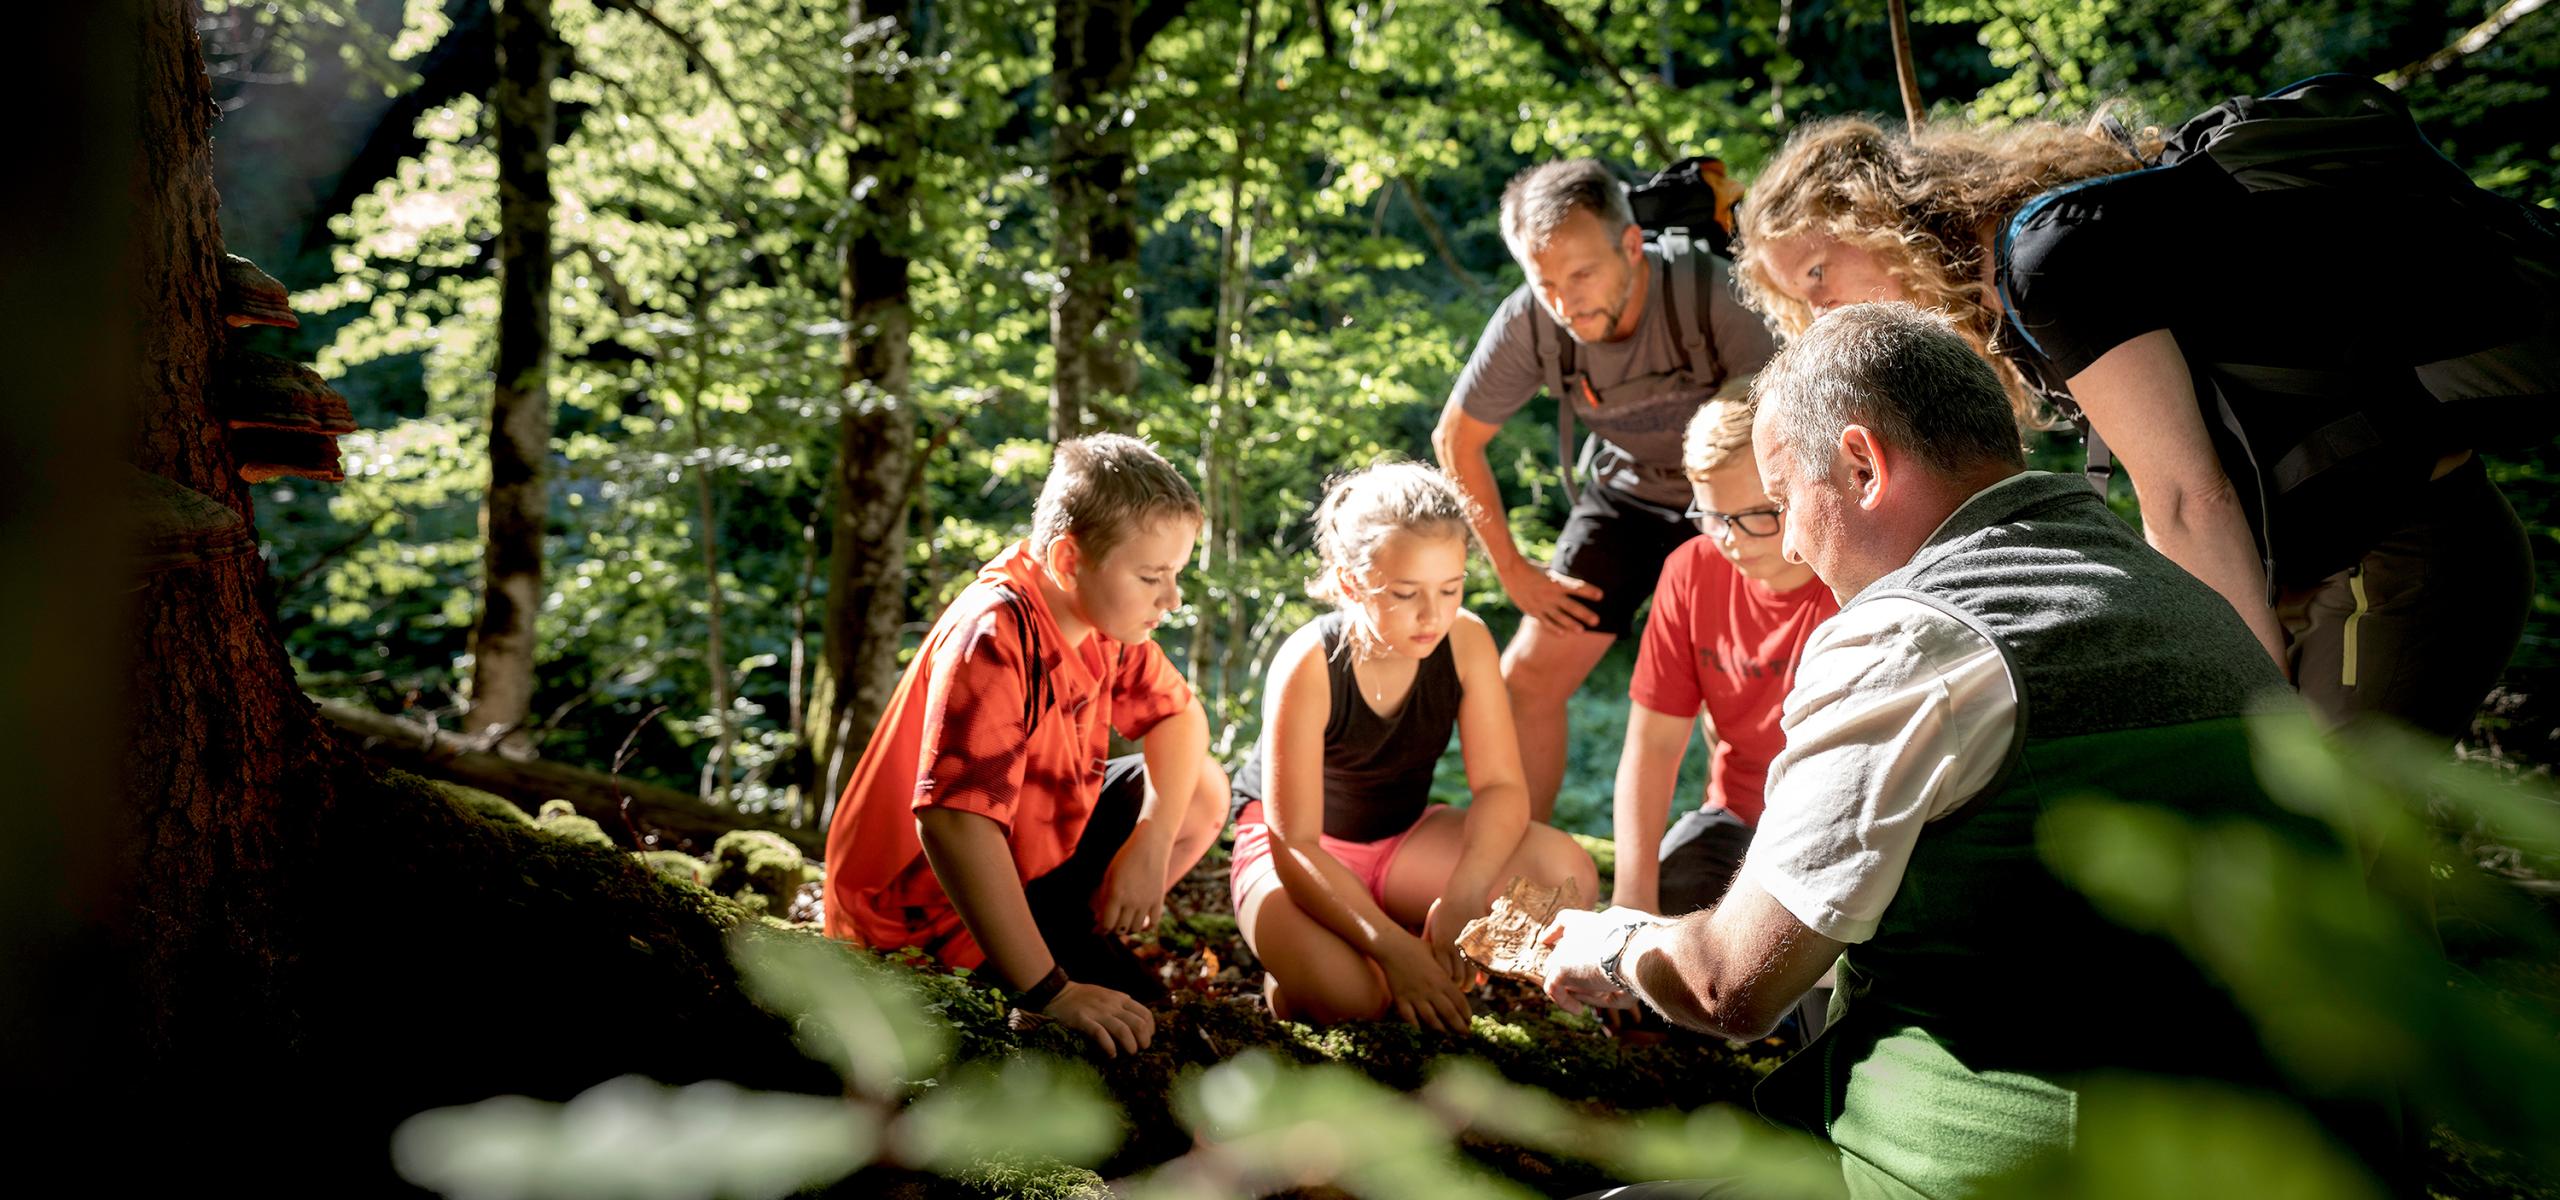 Kalkalpen National Park Ranger tour with adults and children in the forest